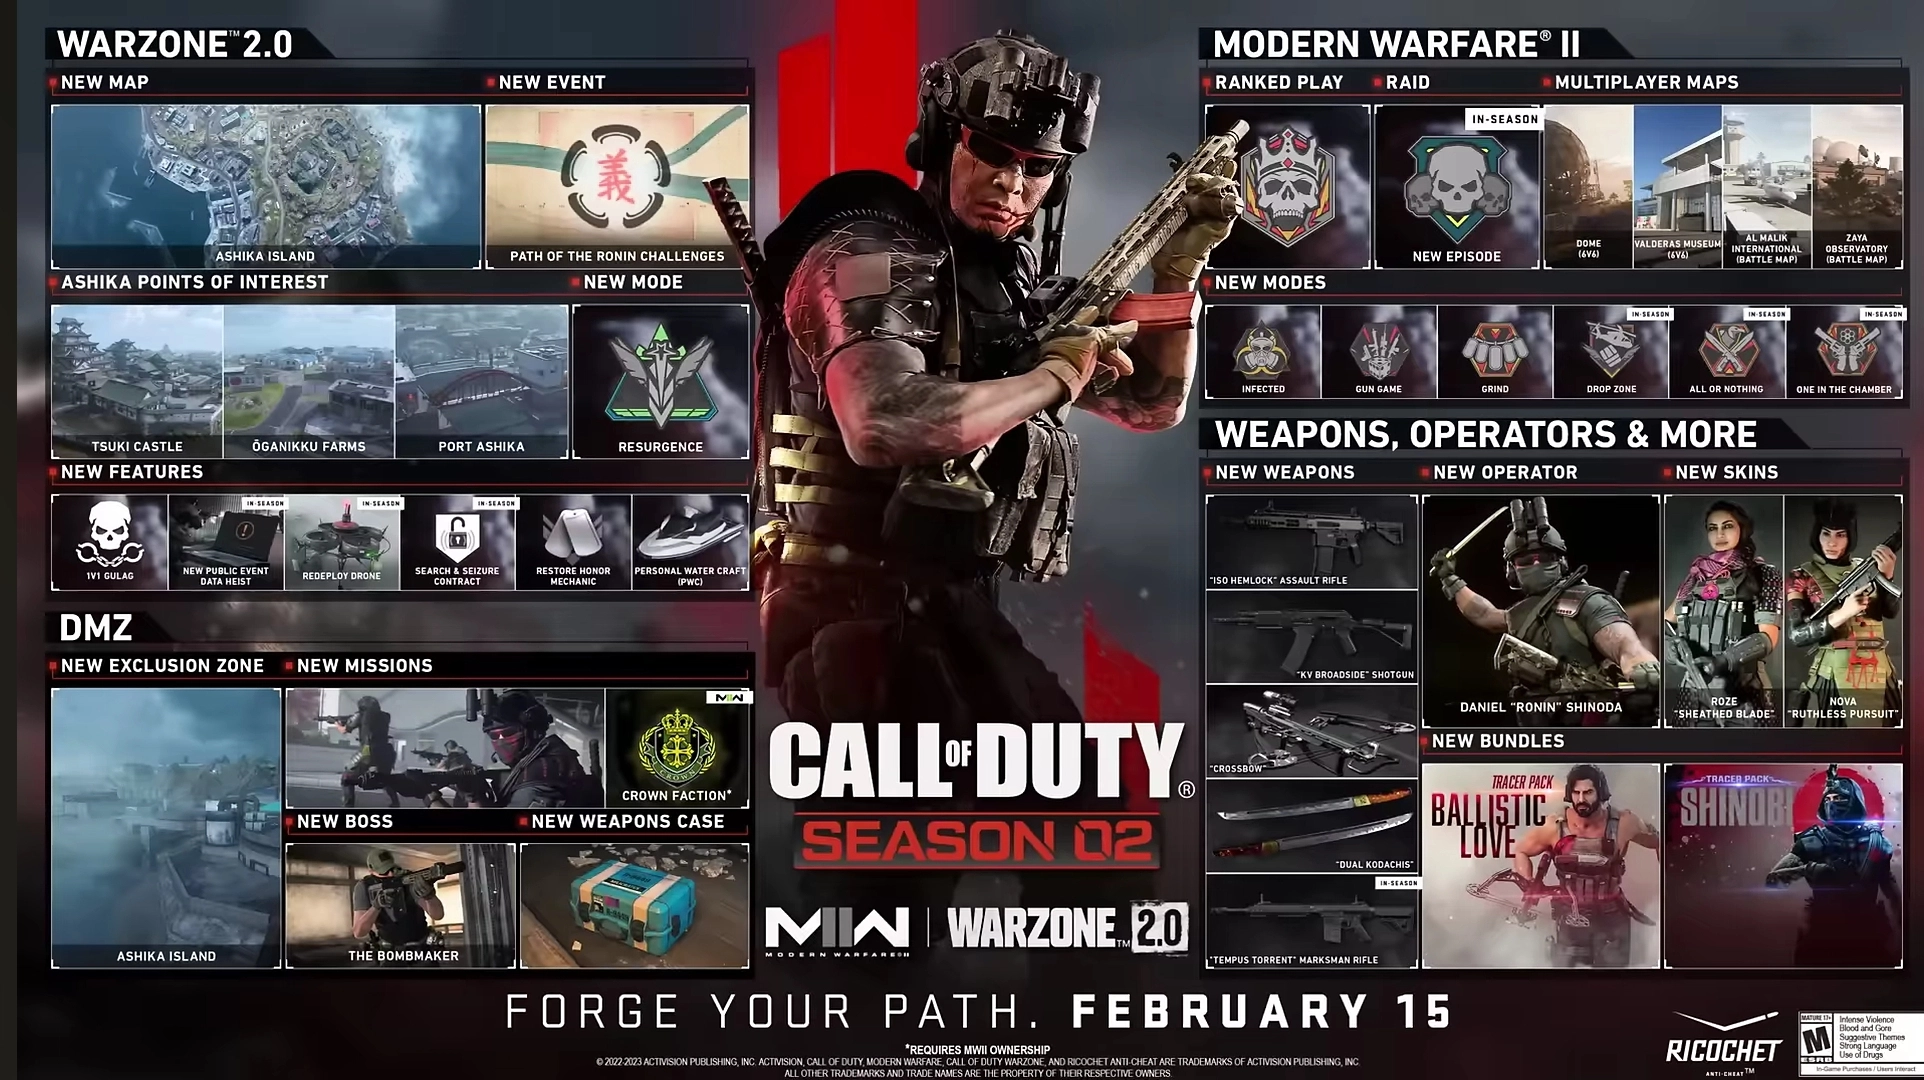 All new weapons coming to MW2 and Warzone 2 Season 6